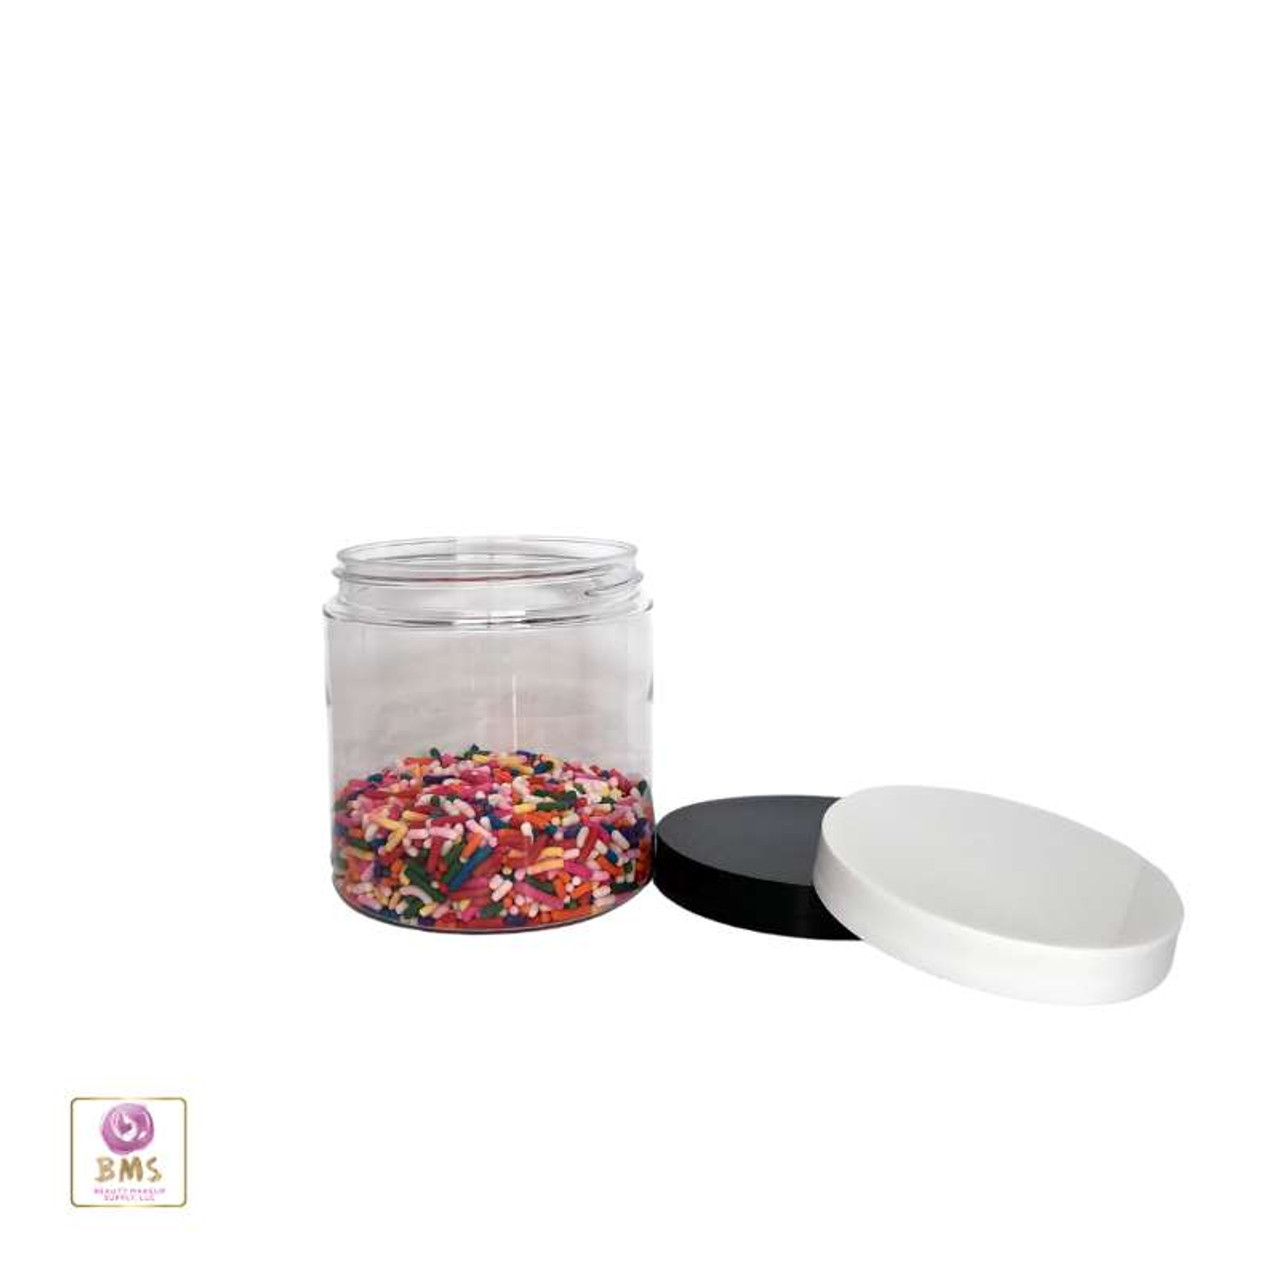 https://cdn11.bigcommerce.com/s-qd7k5gxi/images/stencil/1280x1280/products/541/7379/Plastic-PET-Jars-Clear-Cosmetic-Beauty-Containers-8-oz-White-Black-Cap-9361-9362-Beauty-Makeup-Supply_5738__62146.1661391395.jpg?c=2?imbypass=on